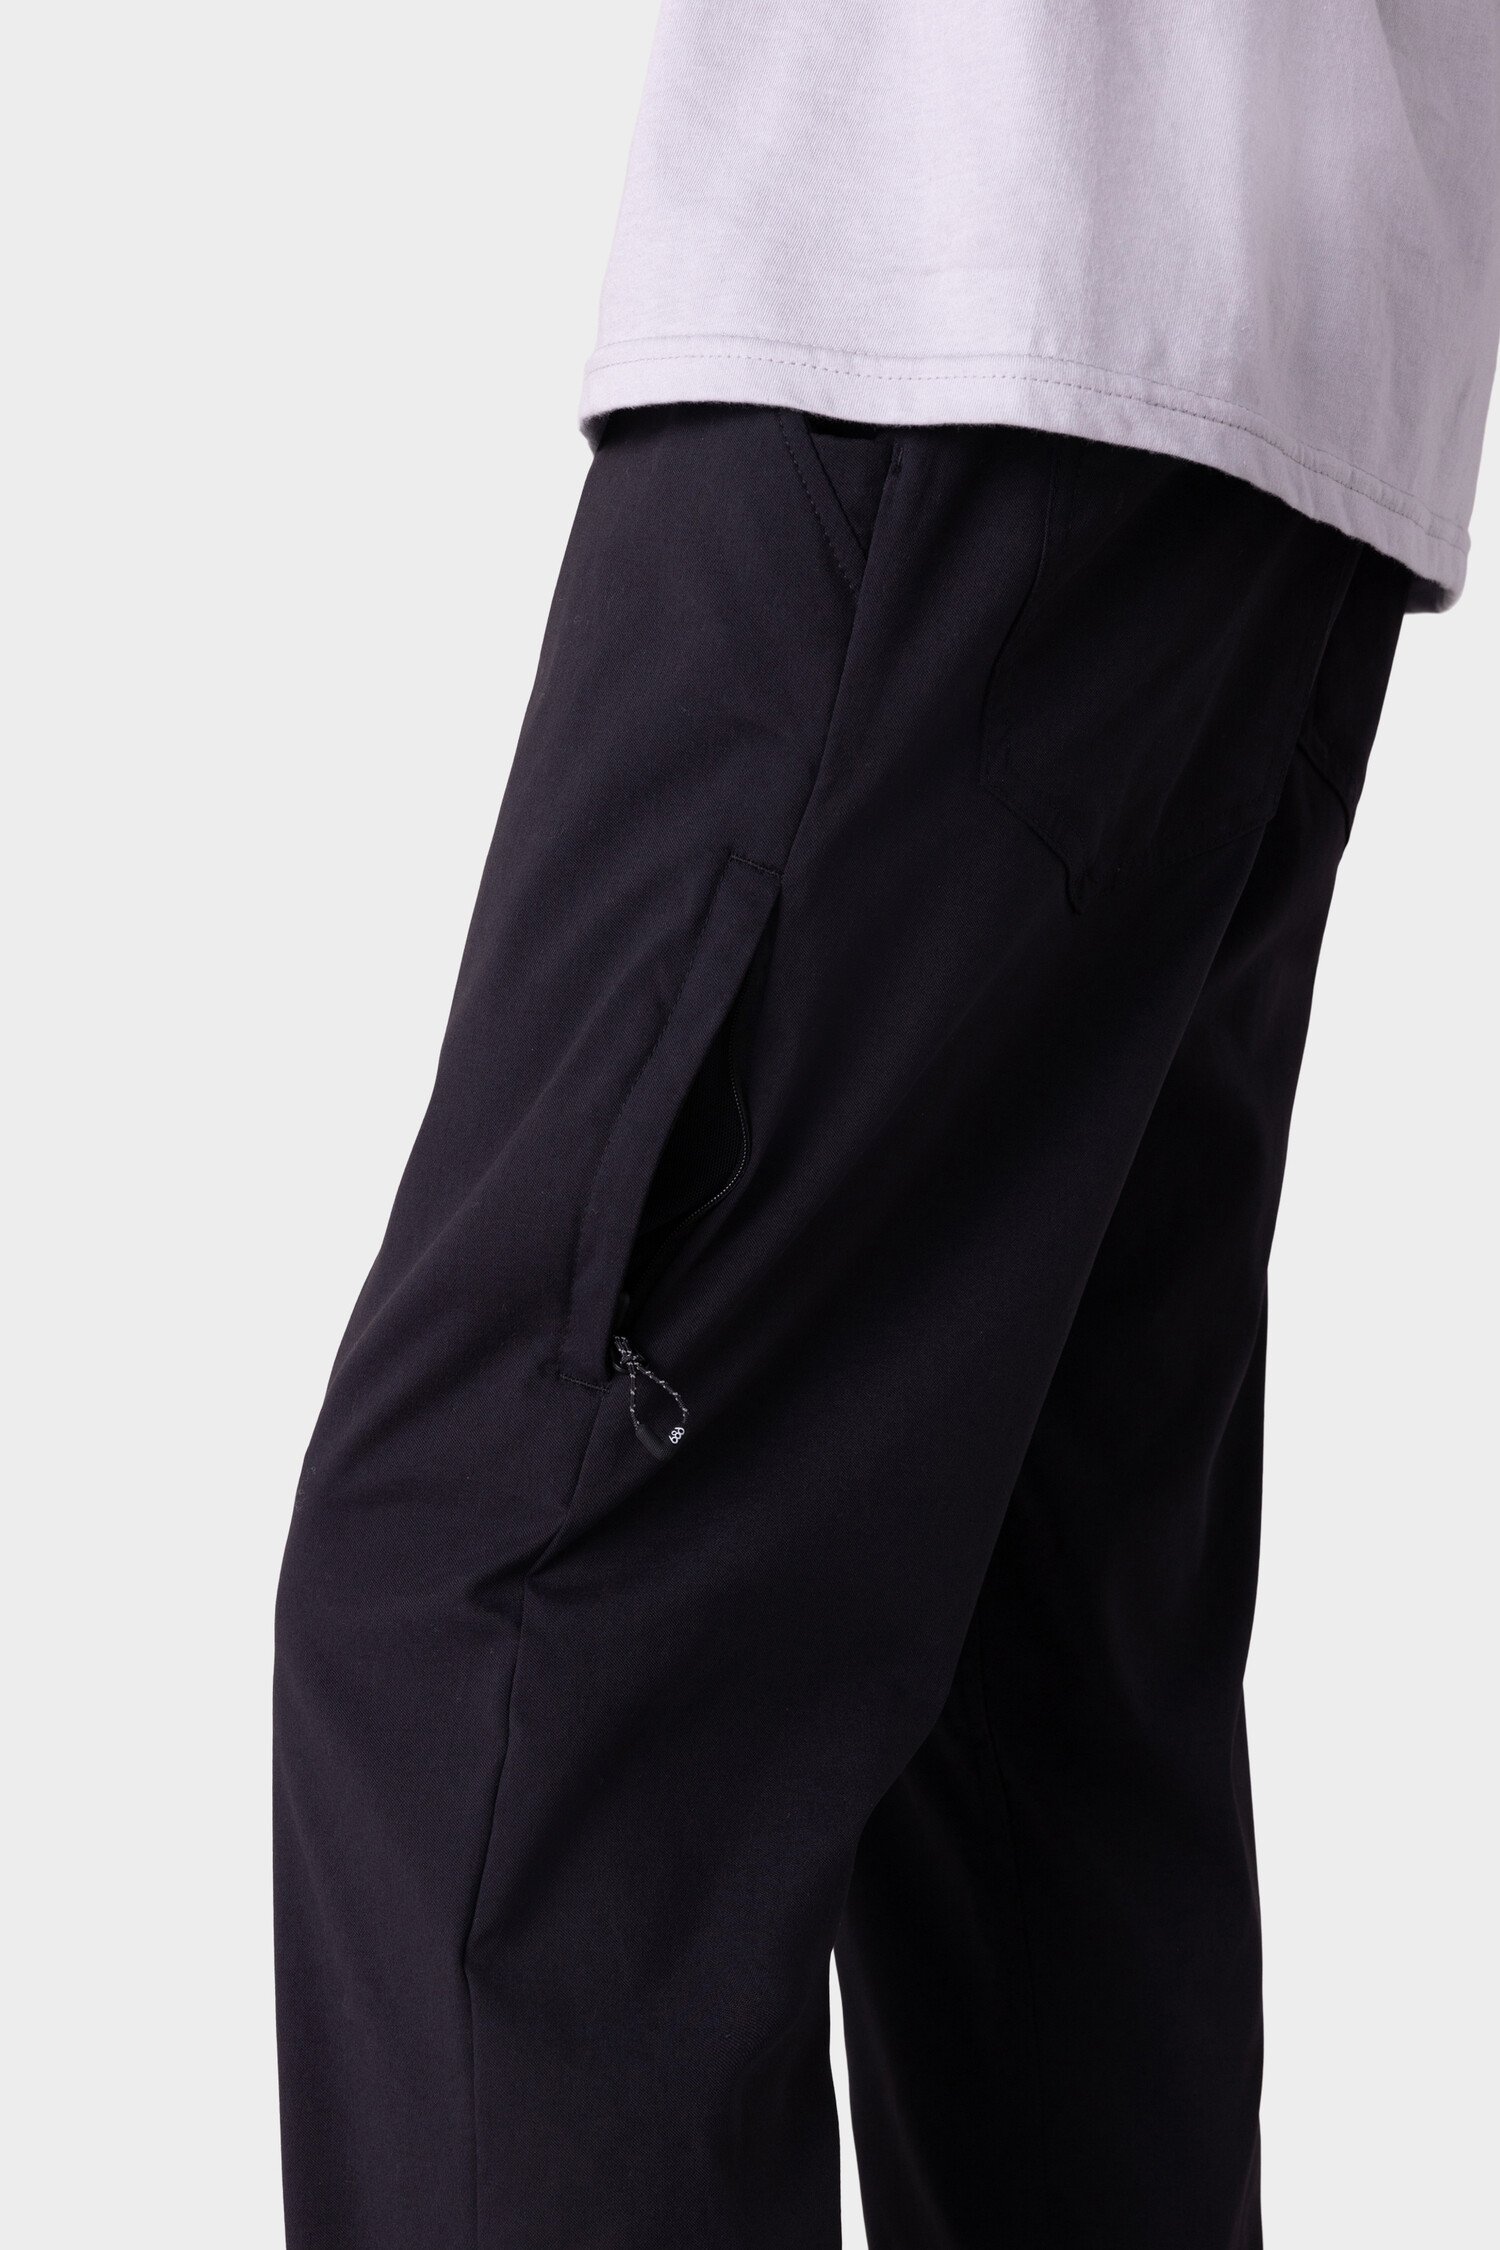 686 M Everywhere Merino Wool Lined Pant Relaxed Fit